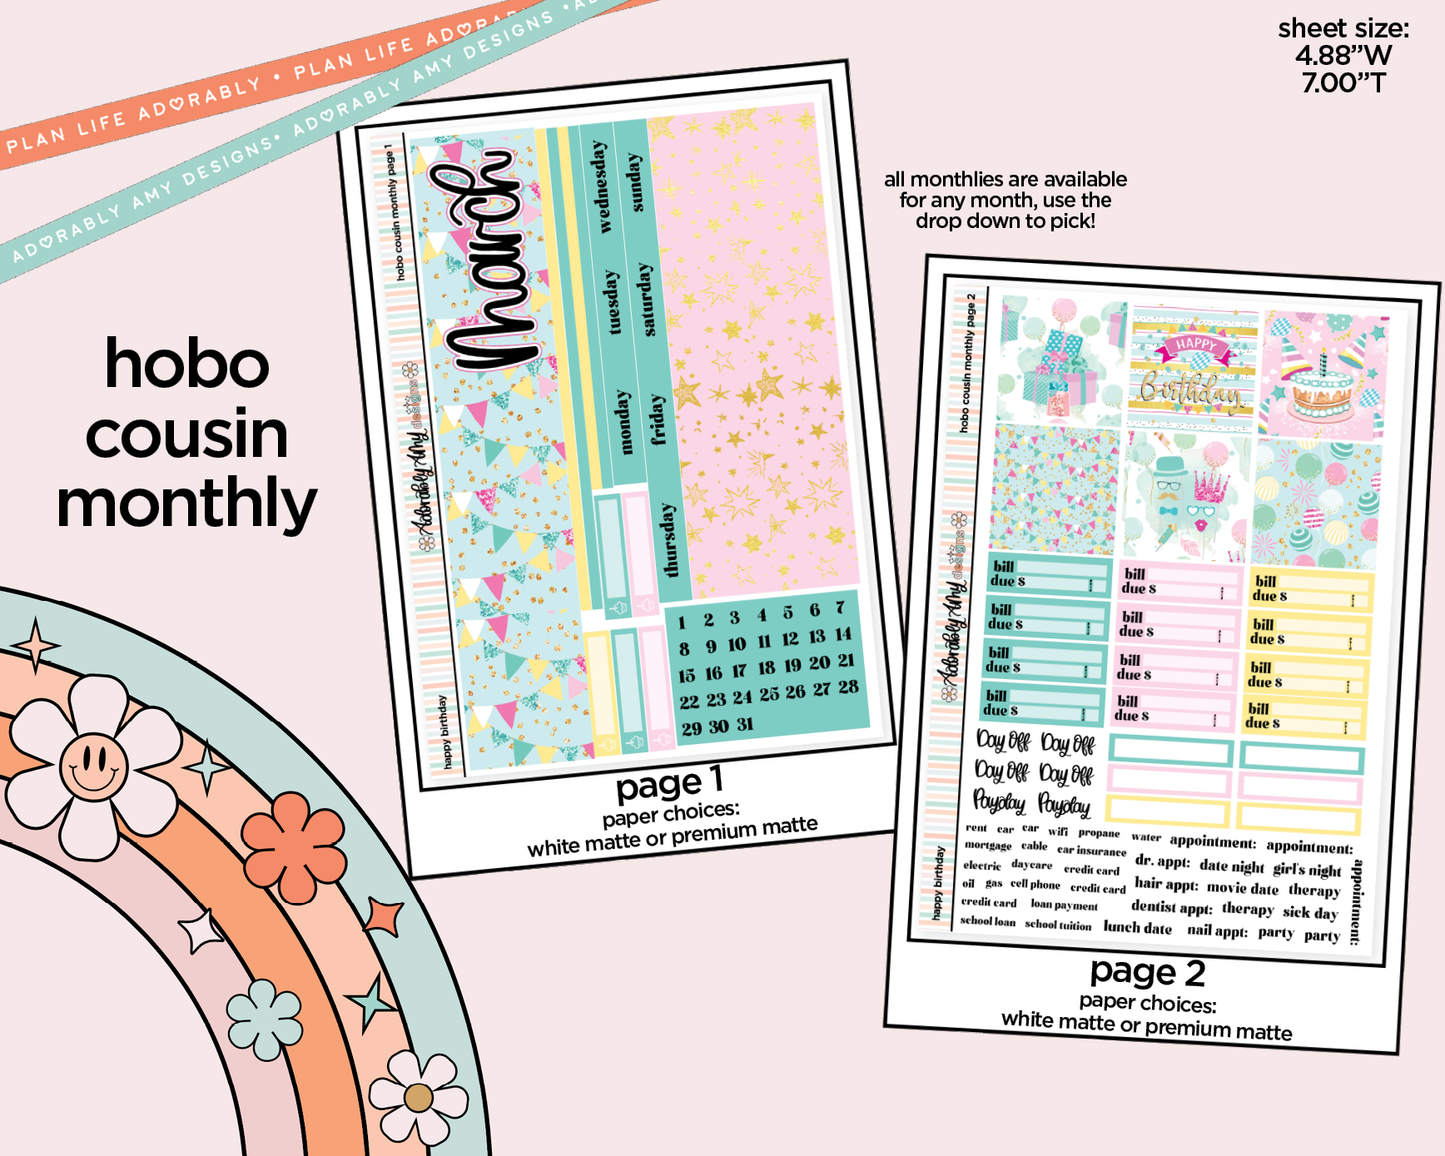 Hobonichi Cousin Monthly Pick Your Month Happy Birthday Planner Sticker Kit for Hobo Cousin or Similar Planners